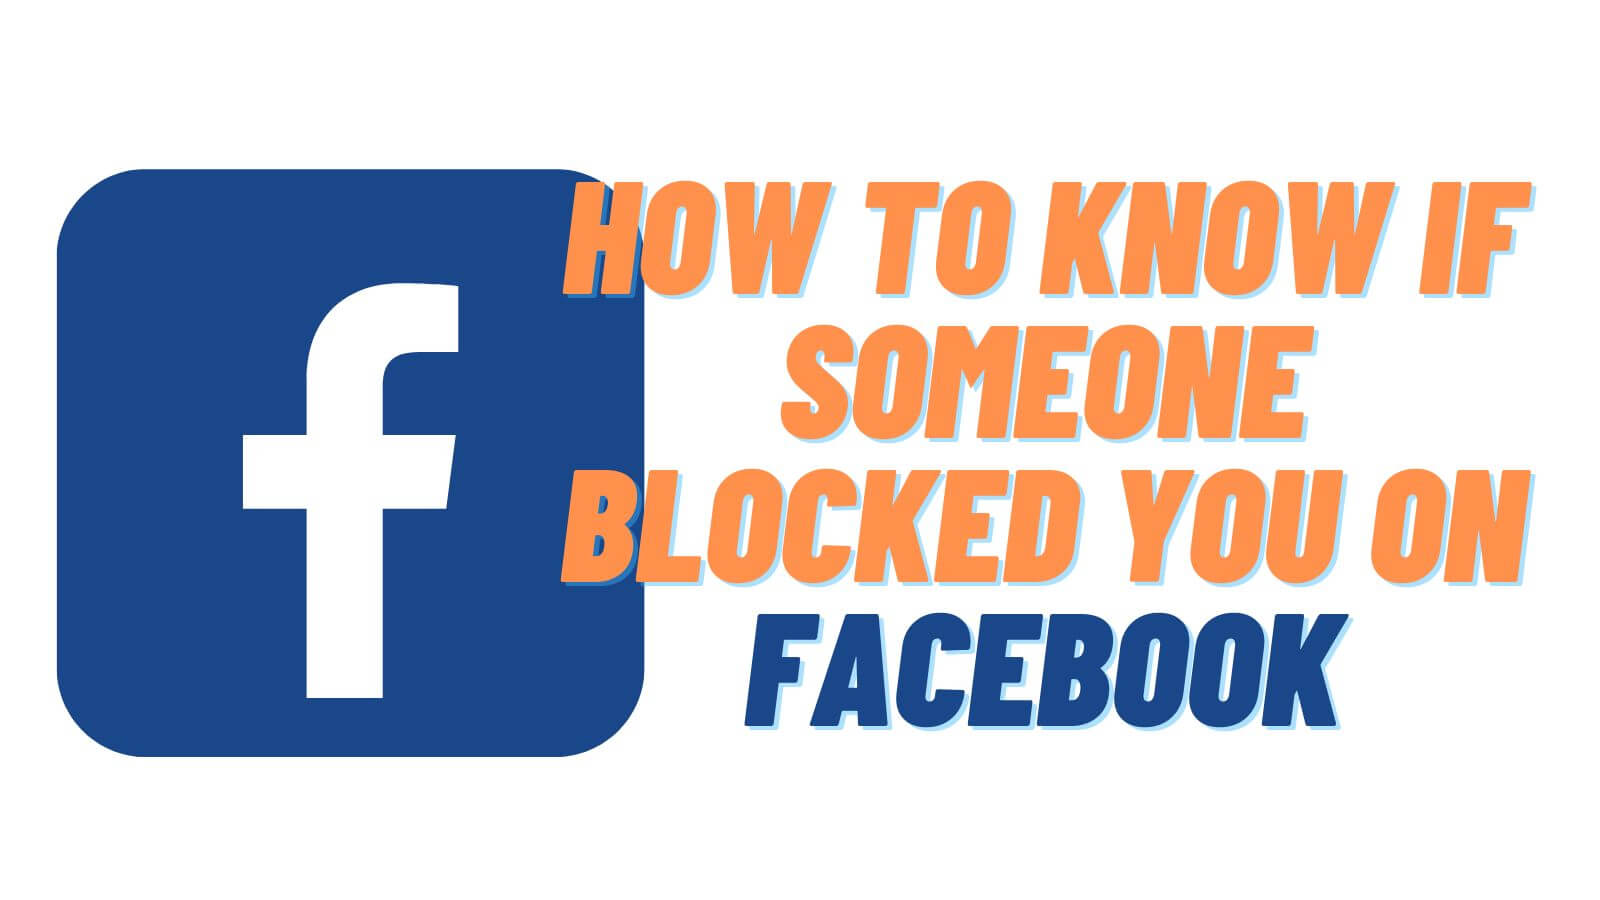 How To See Who Blocked You On Facebook